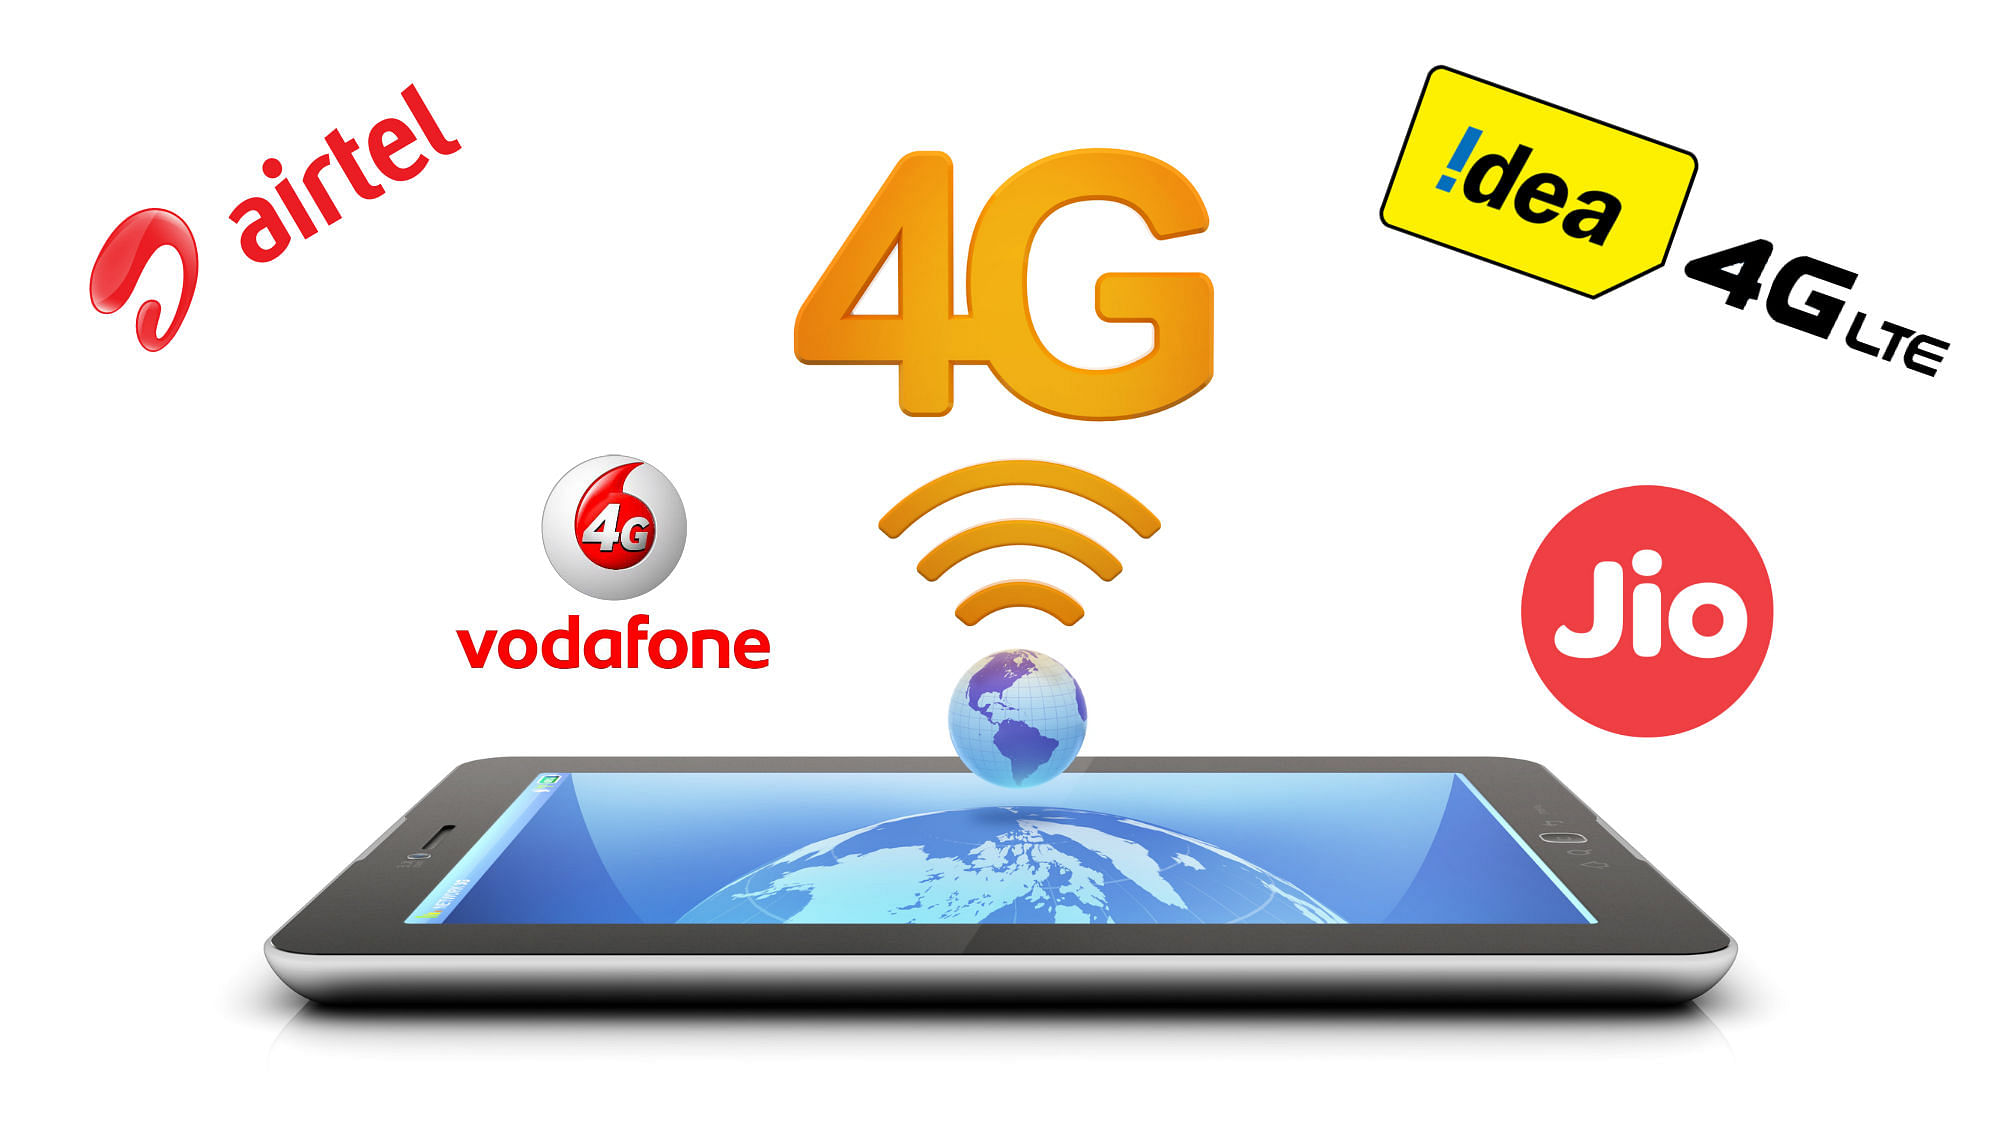 All 4G data prepaid plans available right now have been detailed. 